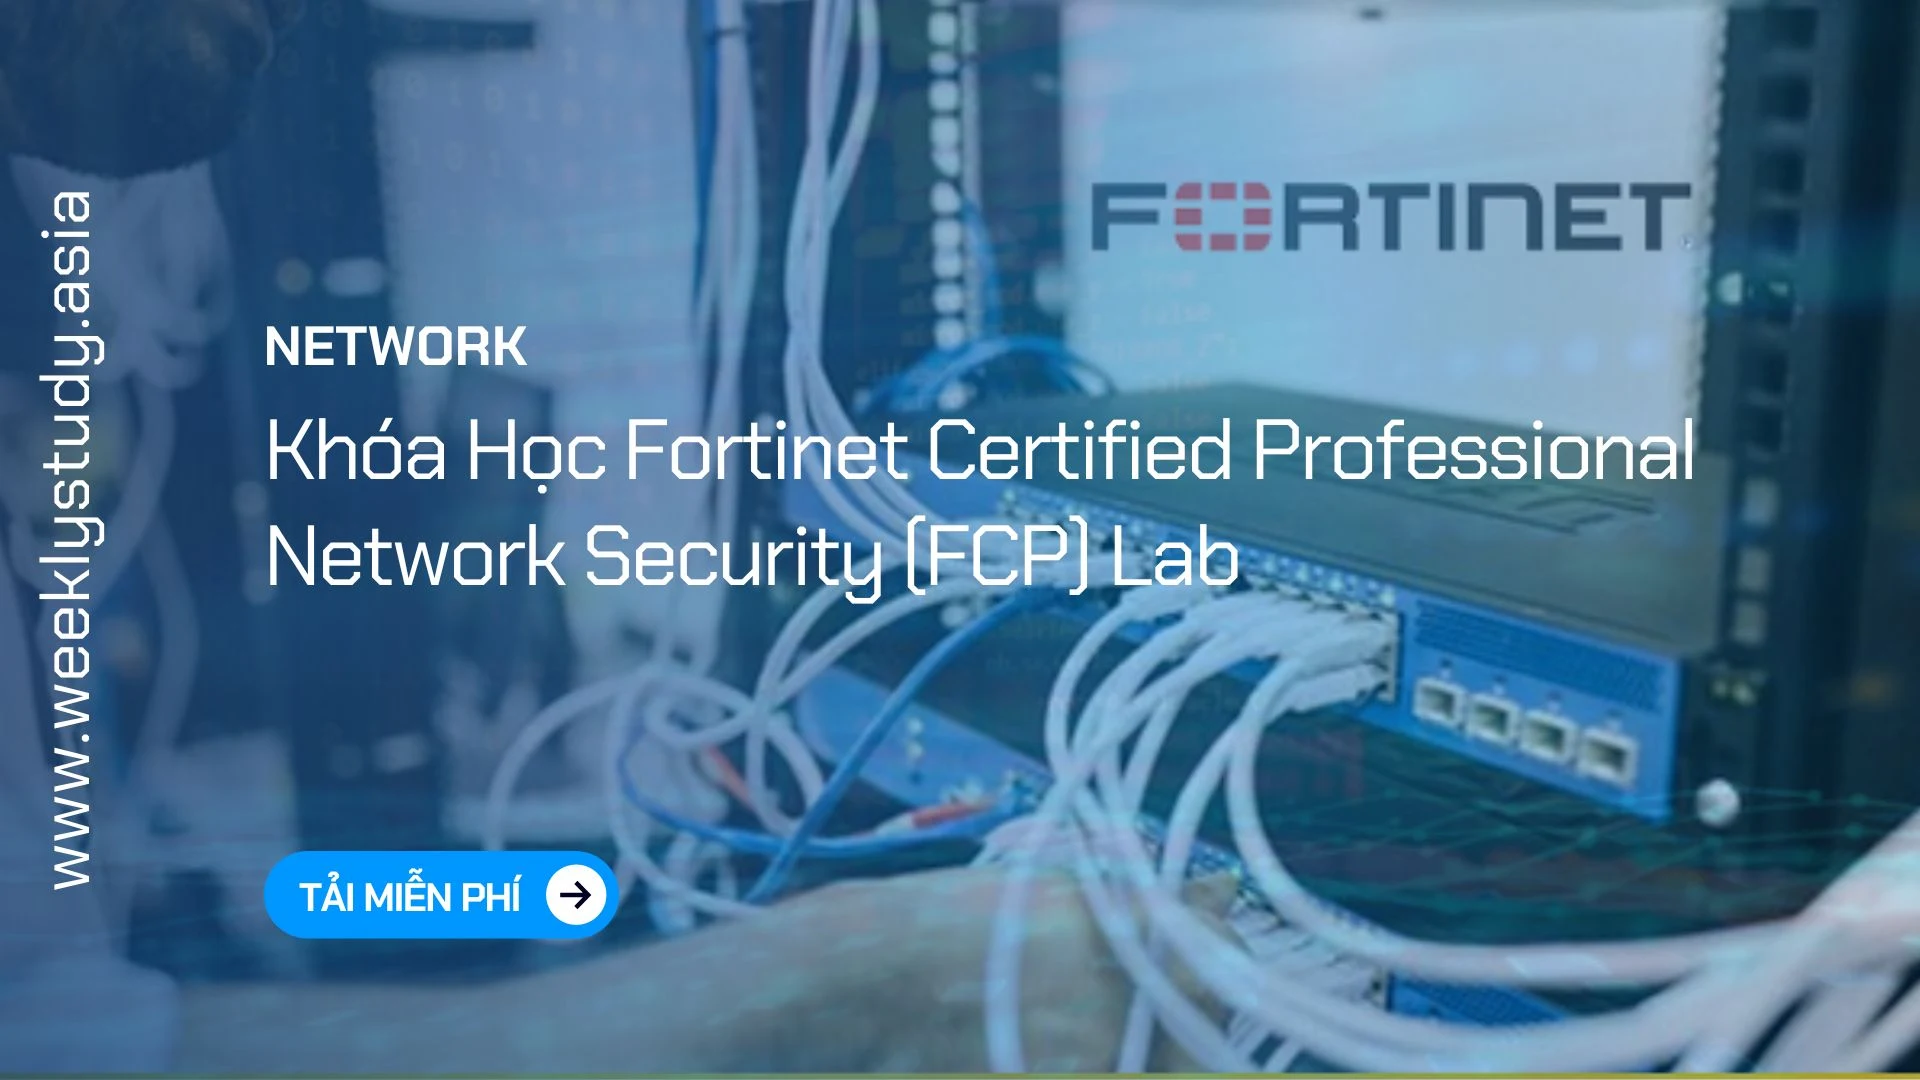 gioi-thieu-khoa-hoc-fortinet-certified-professional-network-security-fcp-lab-ma-6847a